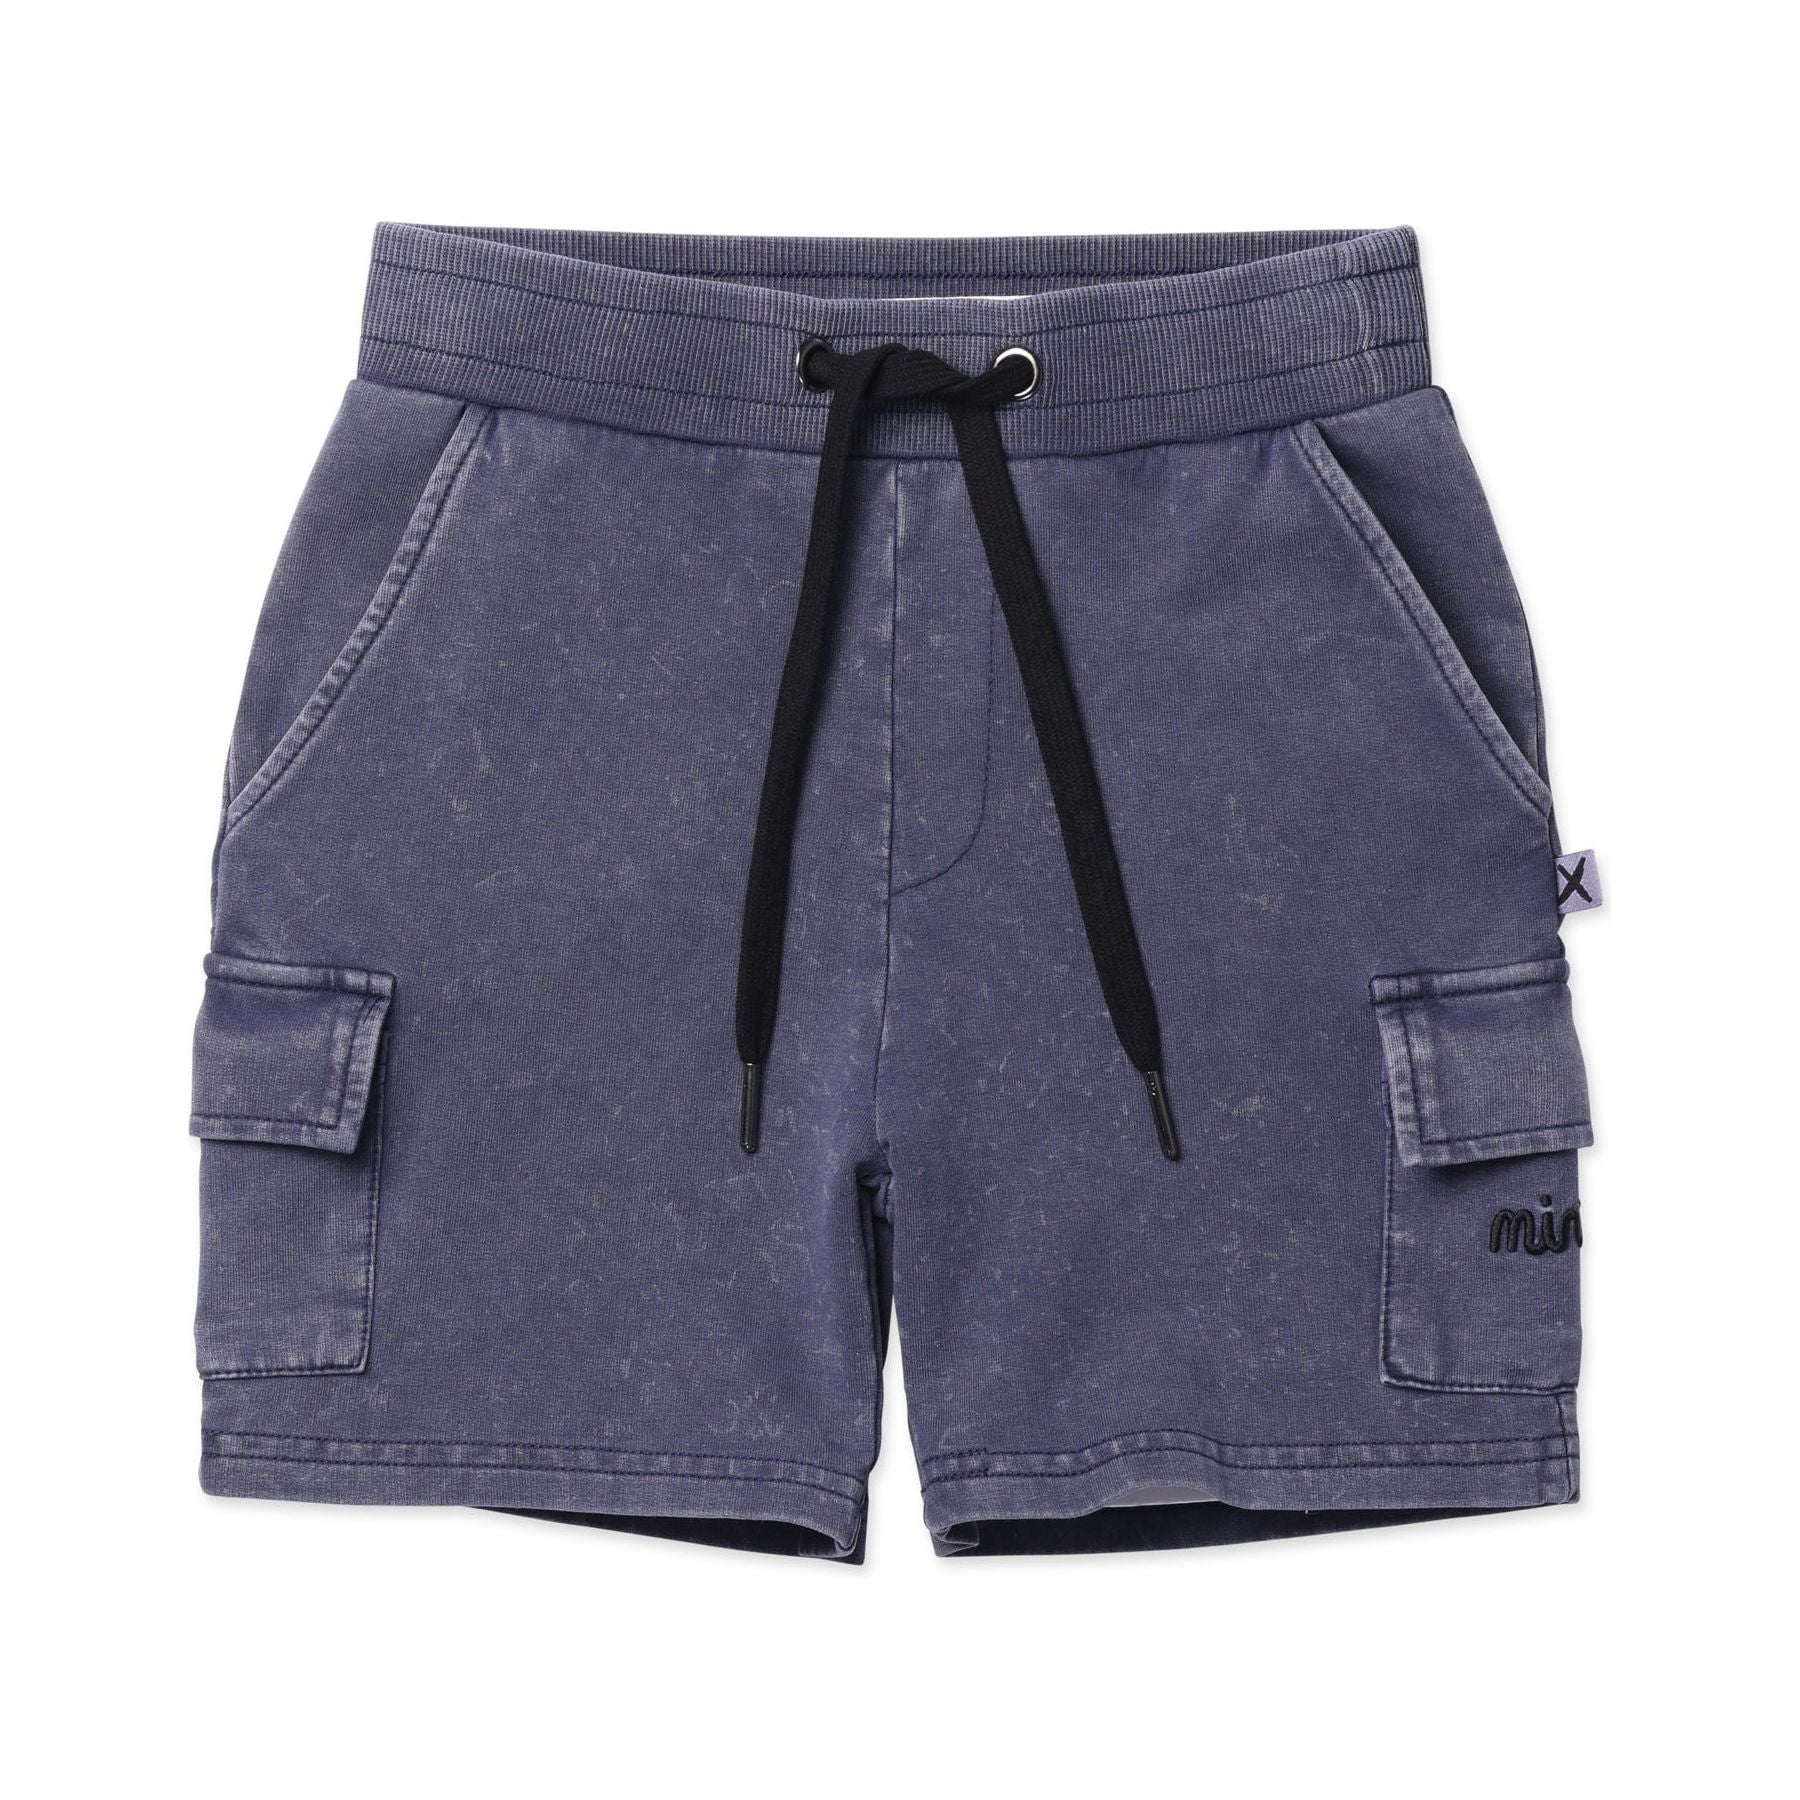 Blasted Deluxe Cargo Short- Bright Blue Wash